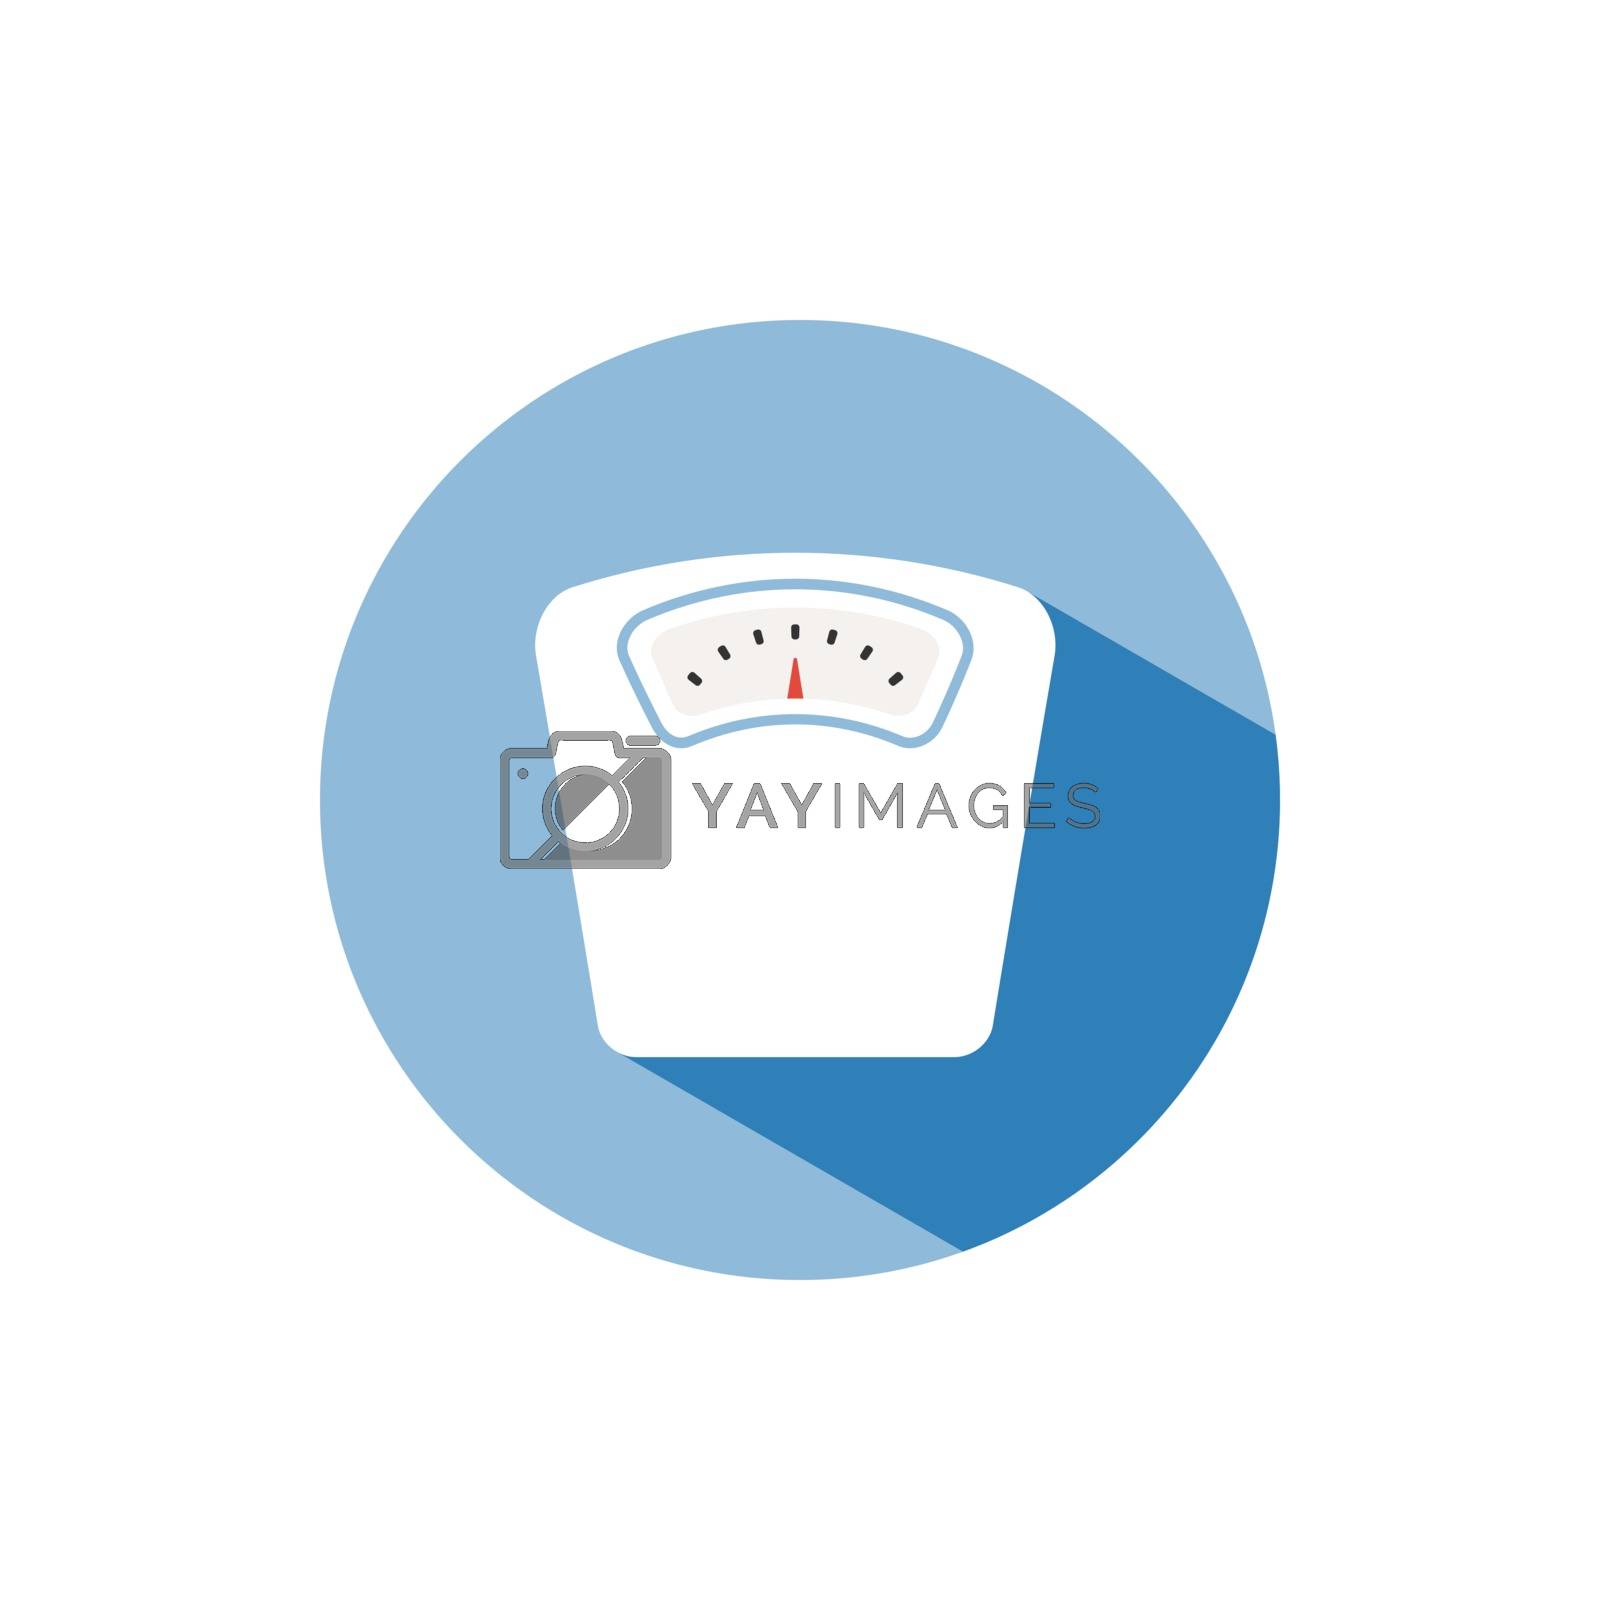 Royalty free image of Bathroom scale color icon with shadow on a blue circle by Imaagio